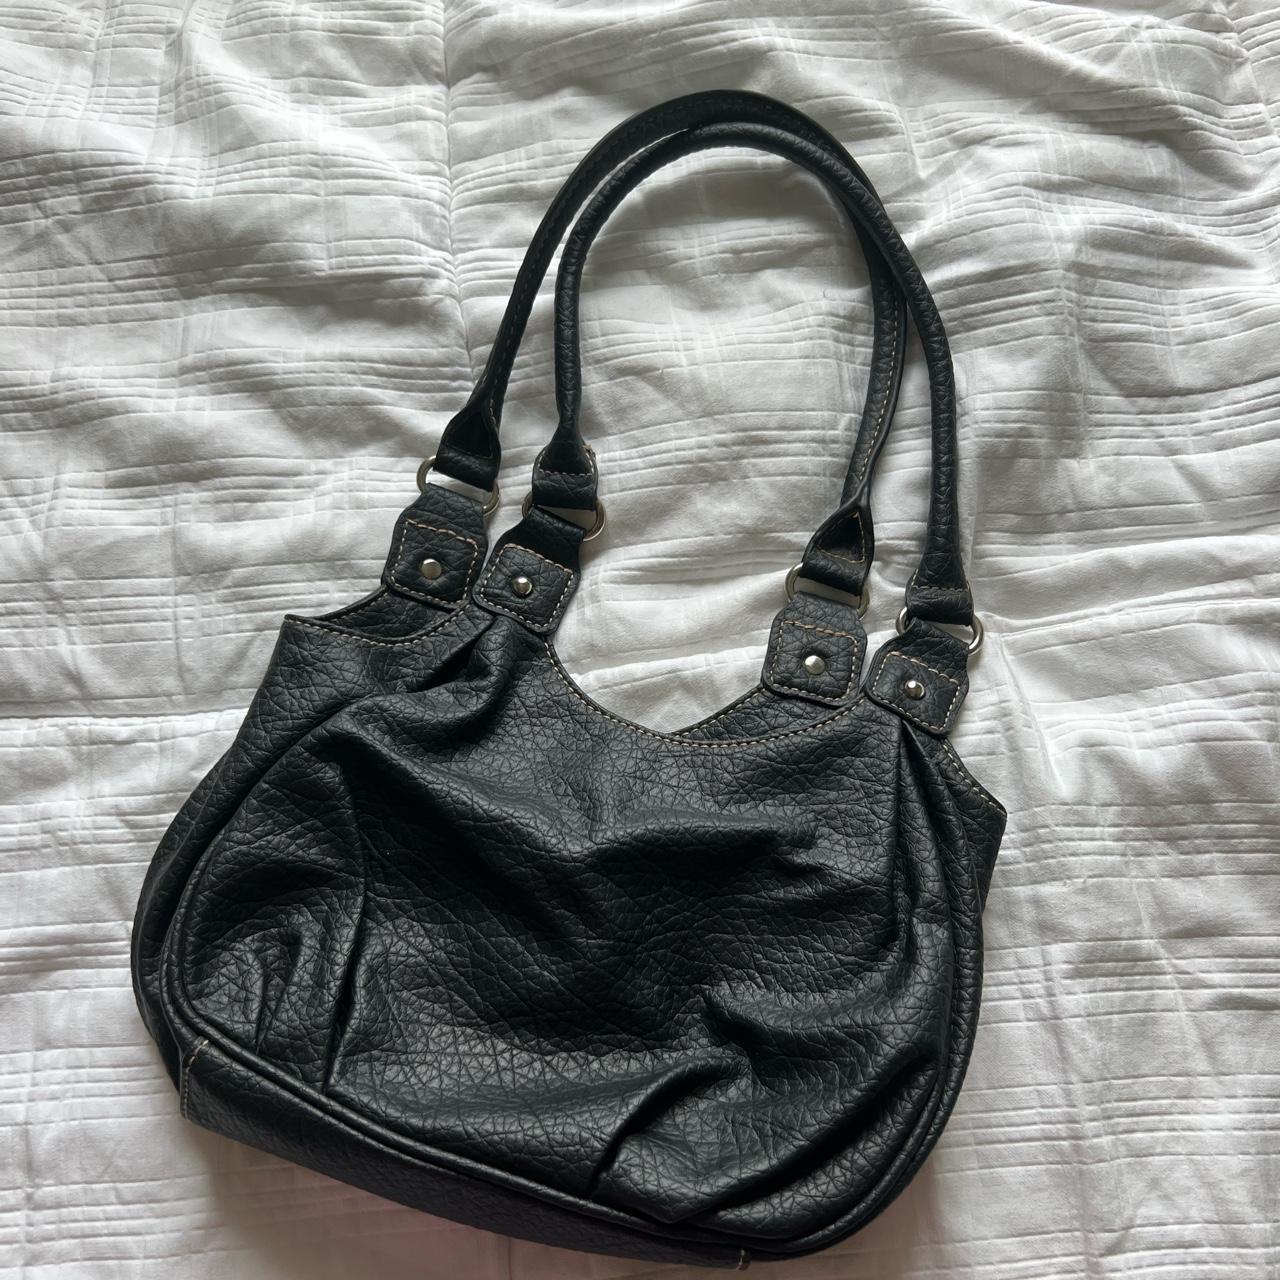 Rosetti Black Purse with silver details - Depop